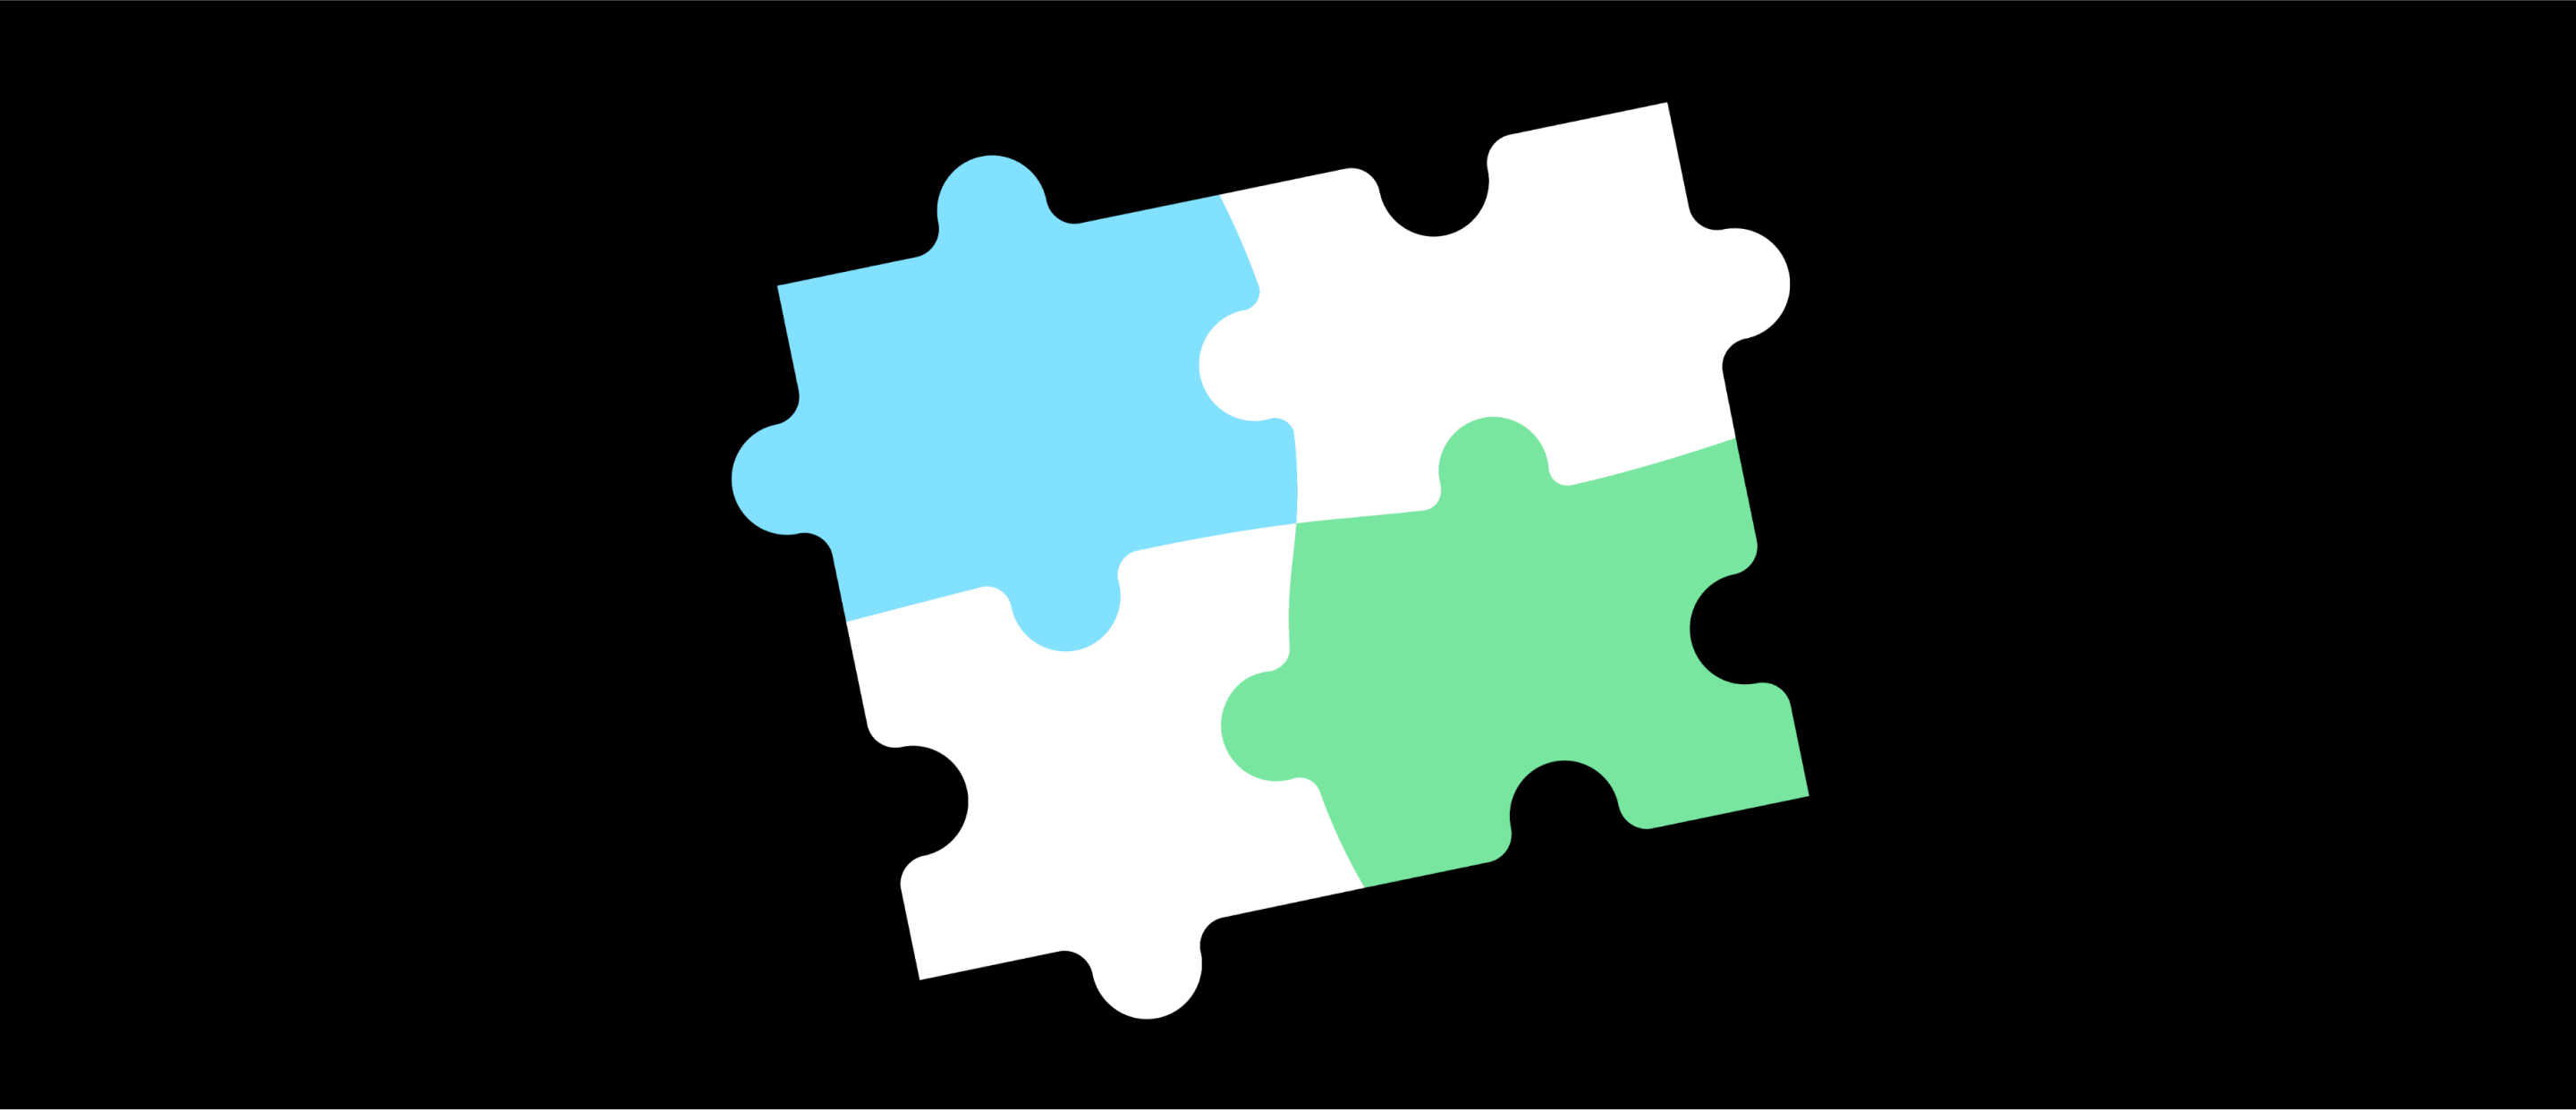 Vector image of four puzzle pieces fit together in a square